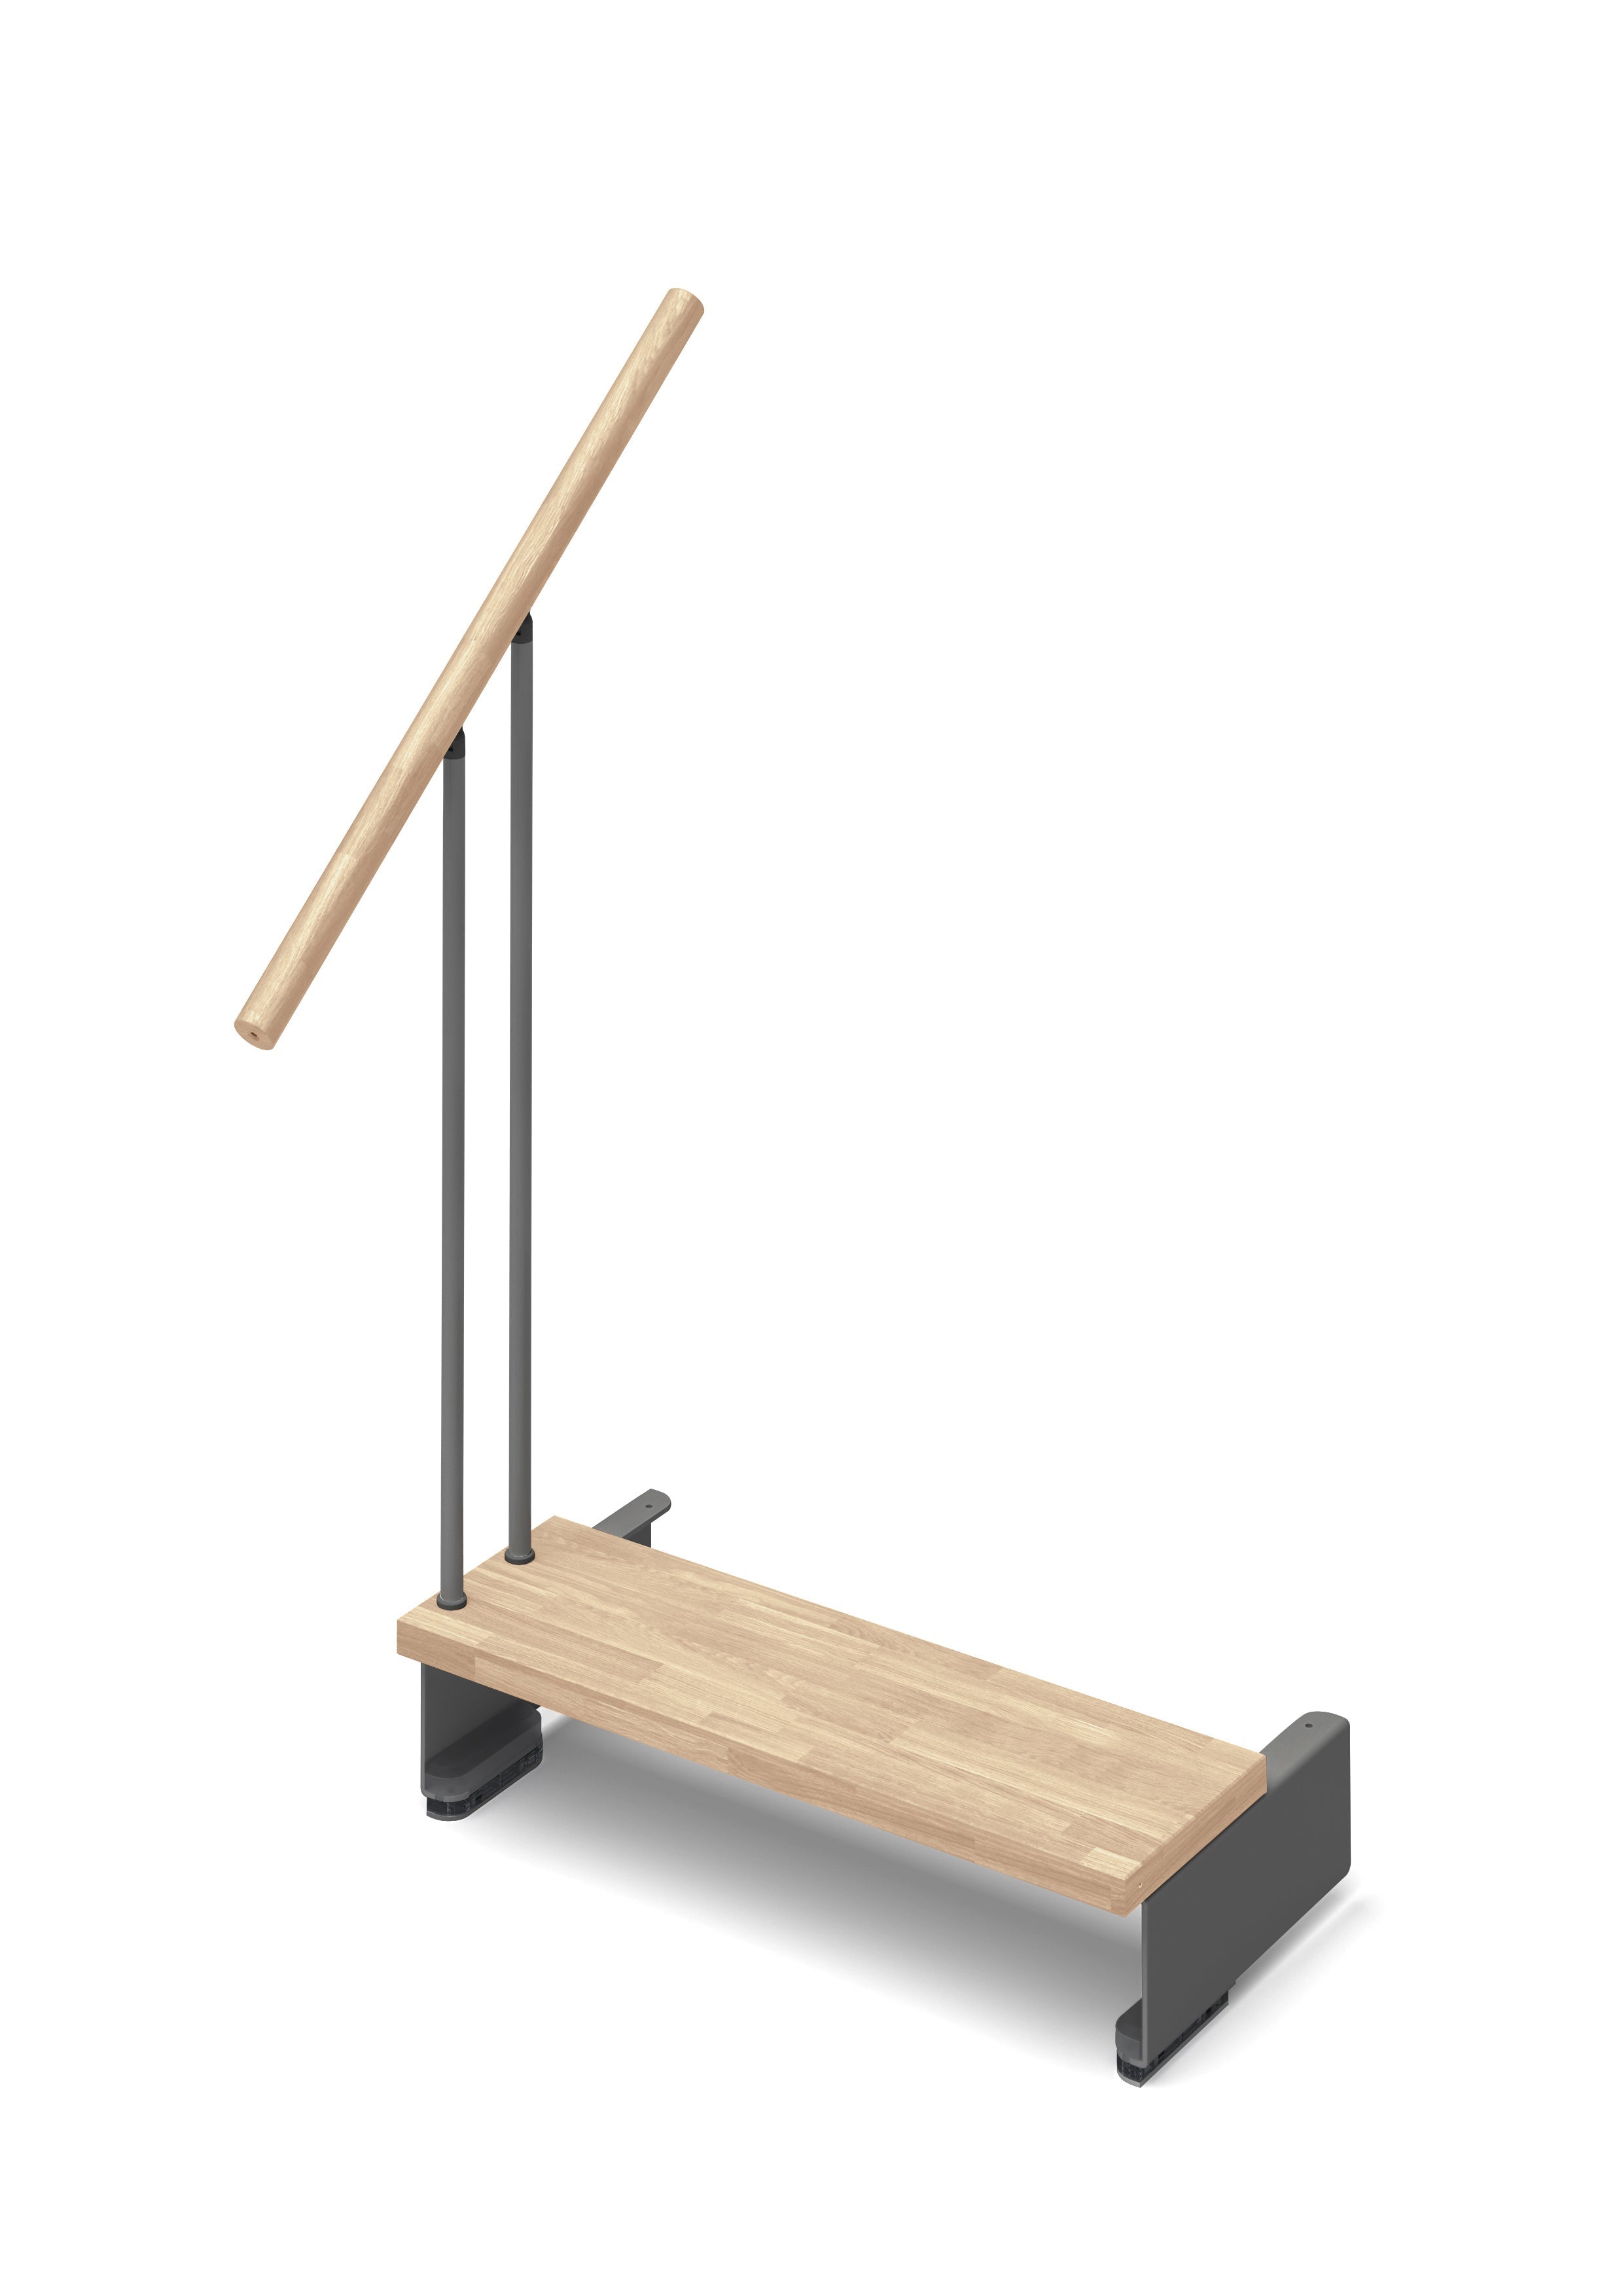 Additional step Adapta 94cm (with structure and railing) - Sand 27